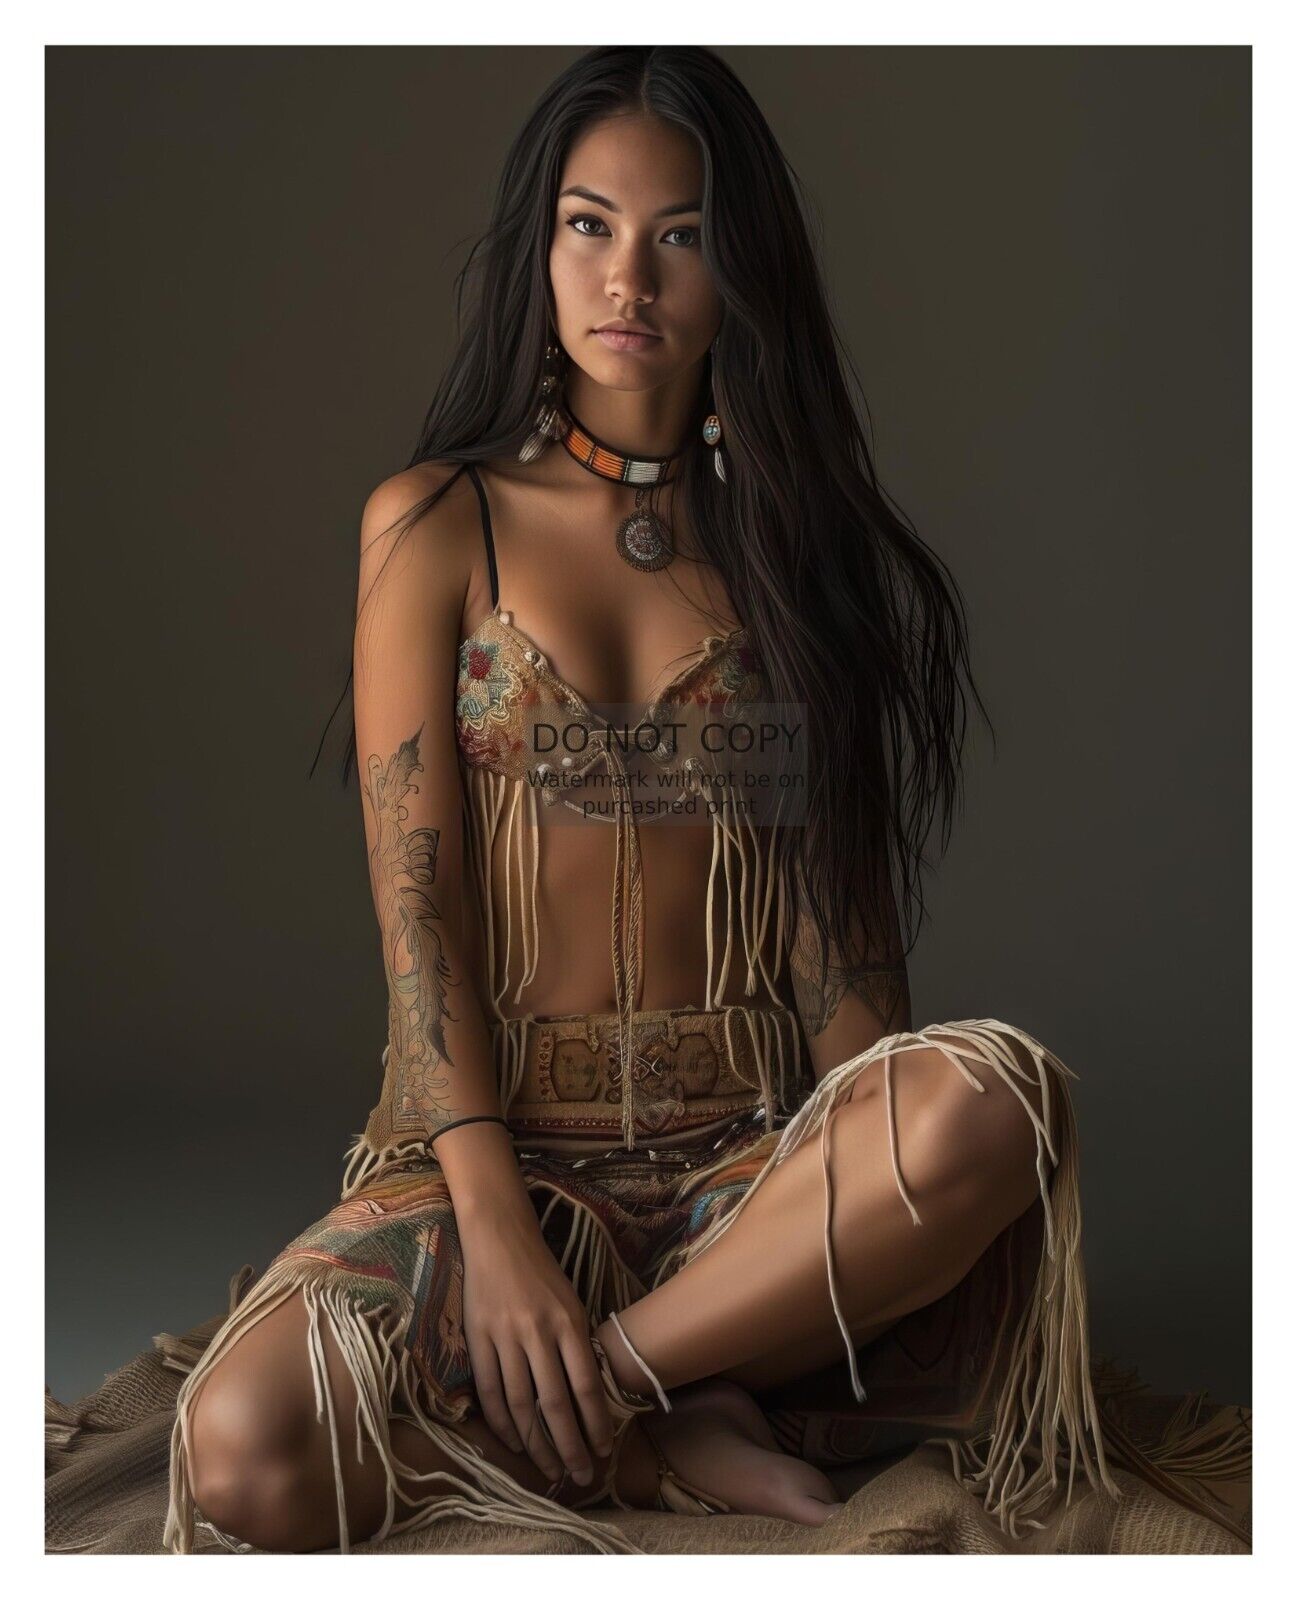 GORGEOUS YOUNG SEXY NATIVE AMERICAN MODEL LADY 8X10 FANTASY PHOTO